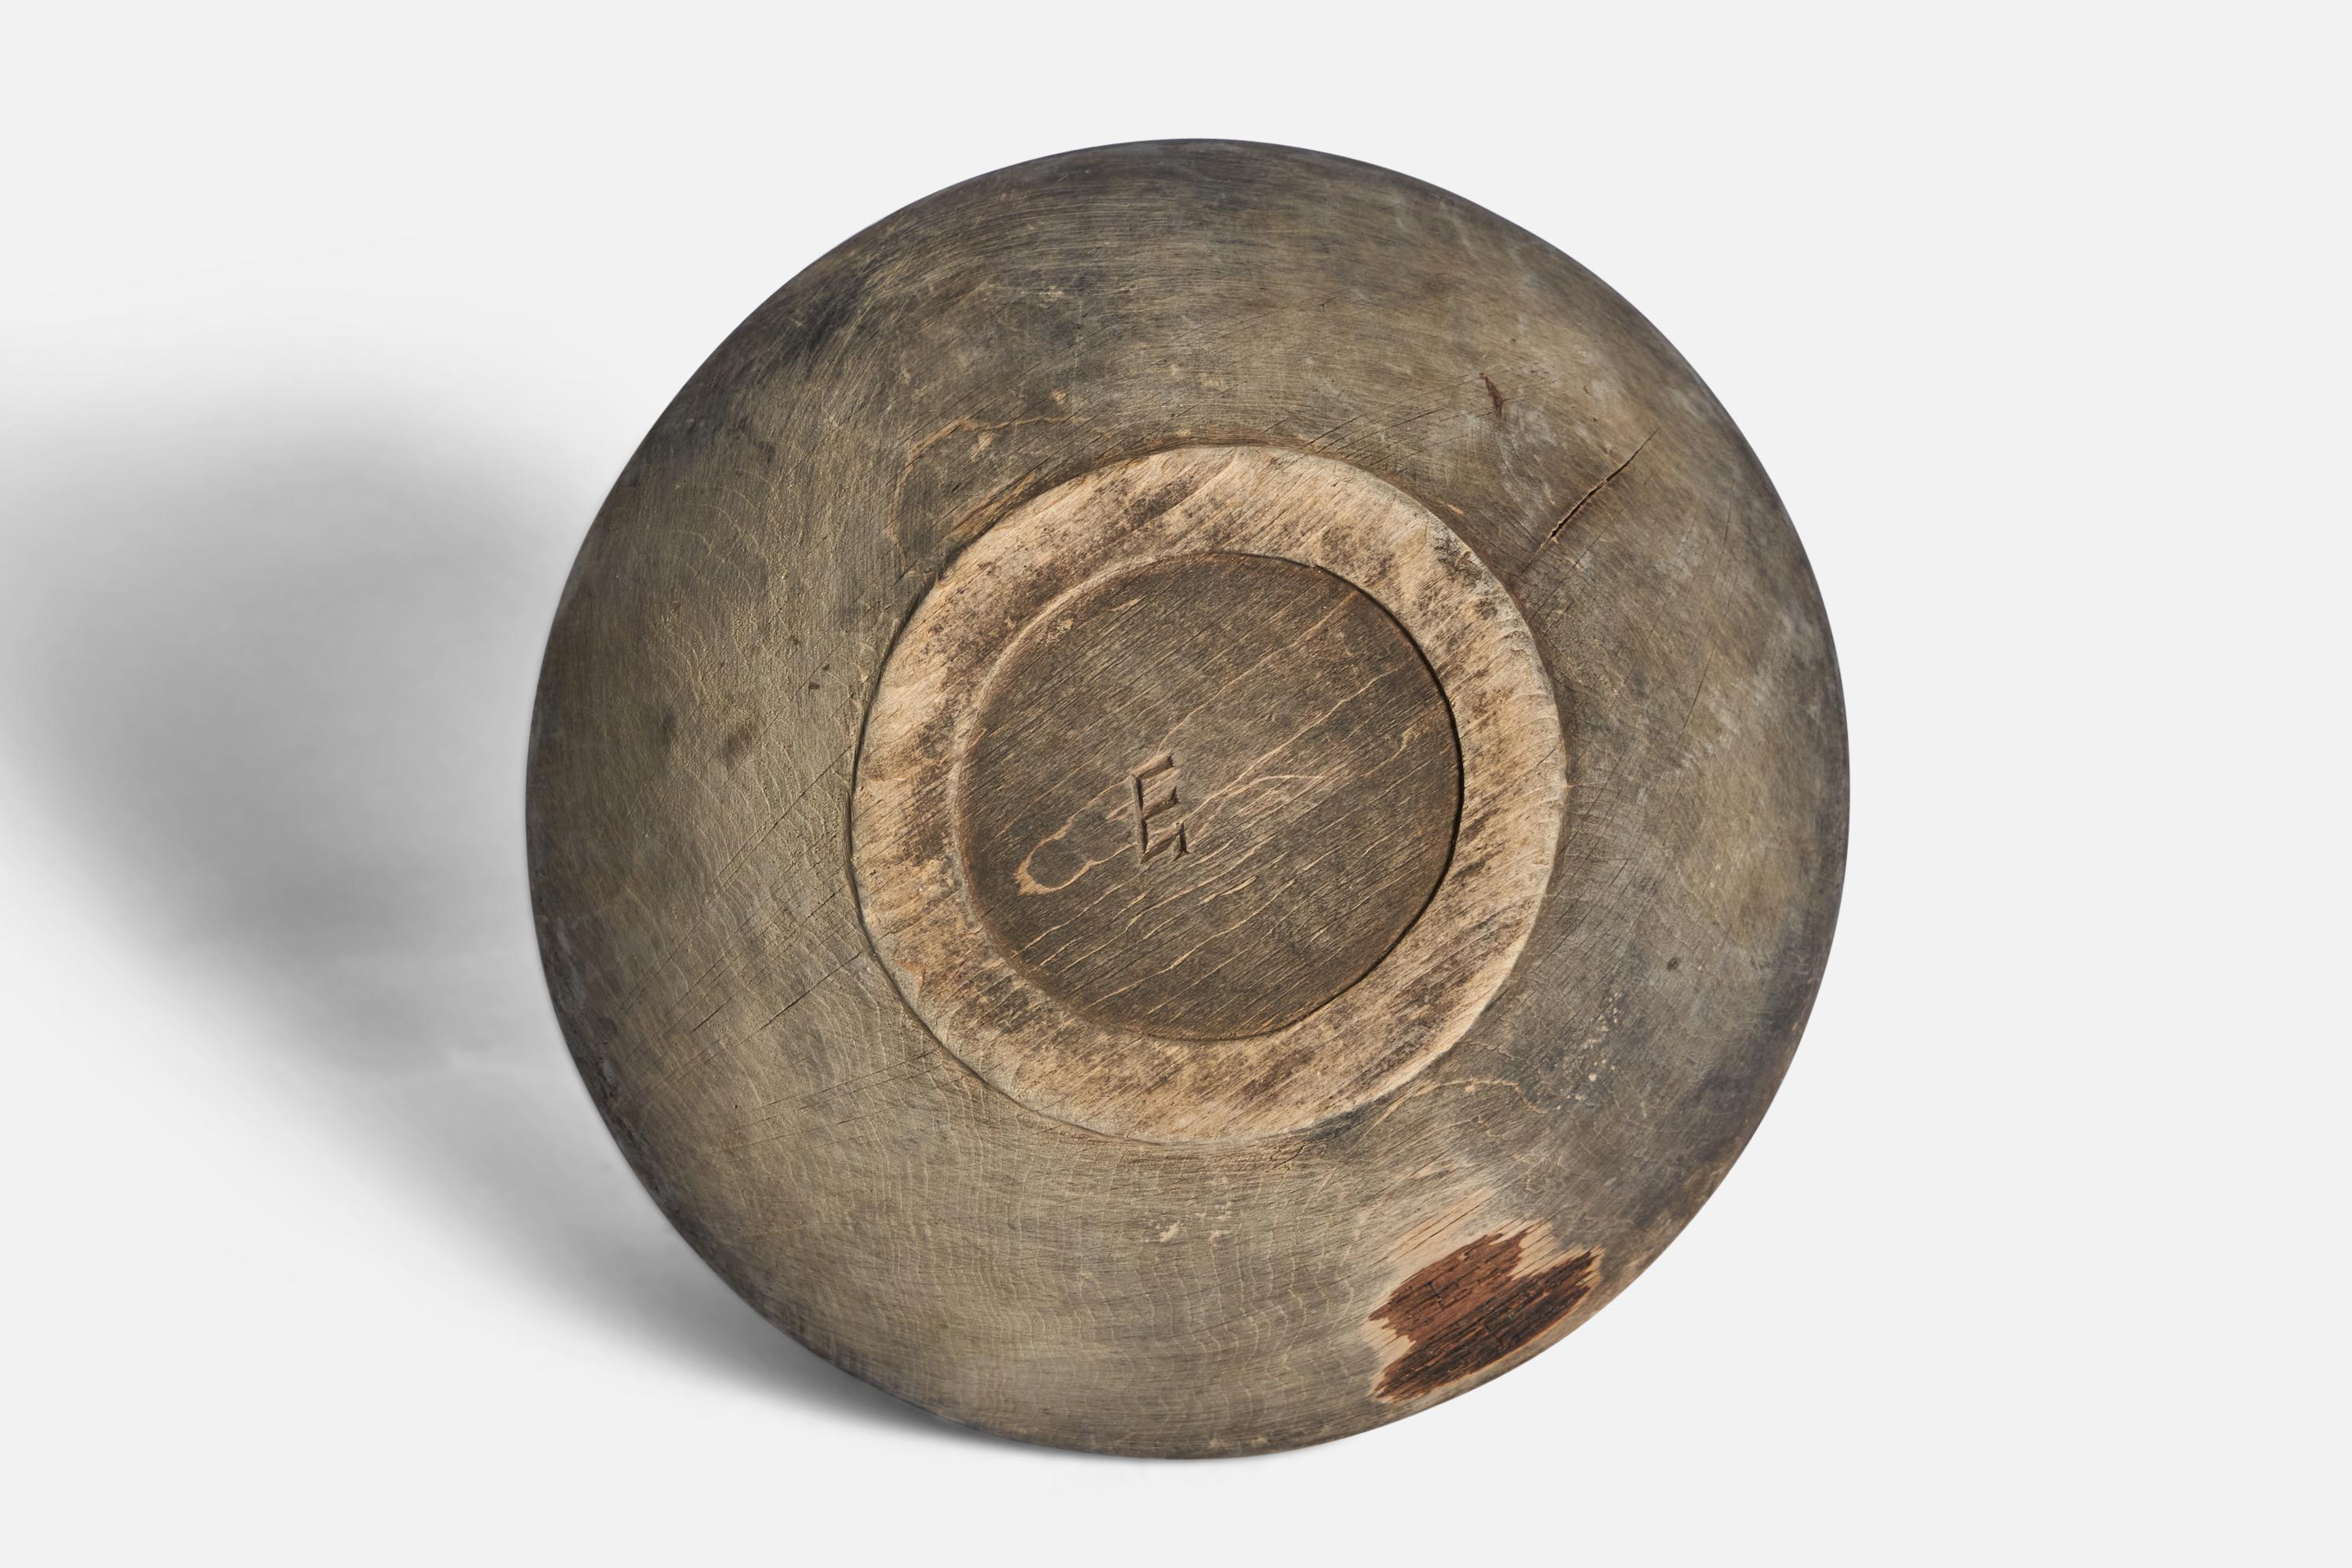 A wood bowl produced in Sweden, 19th century.

“E” symbol on bottom side